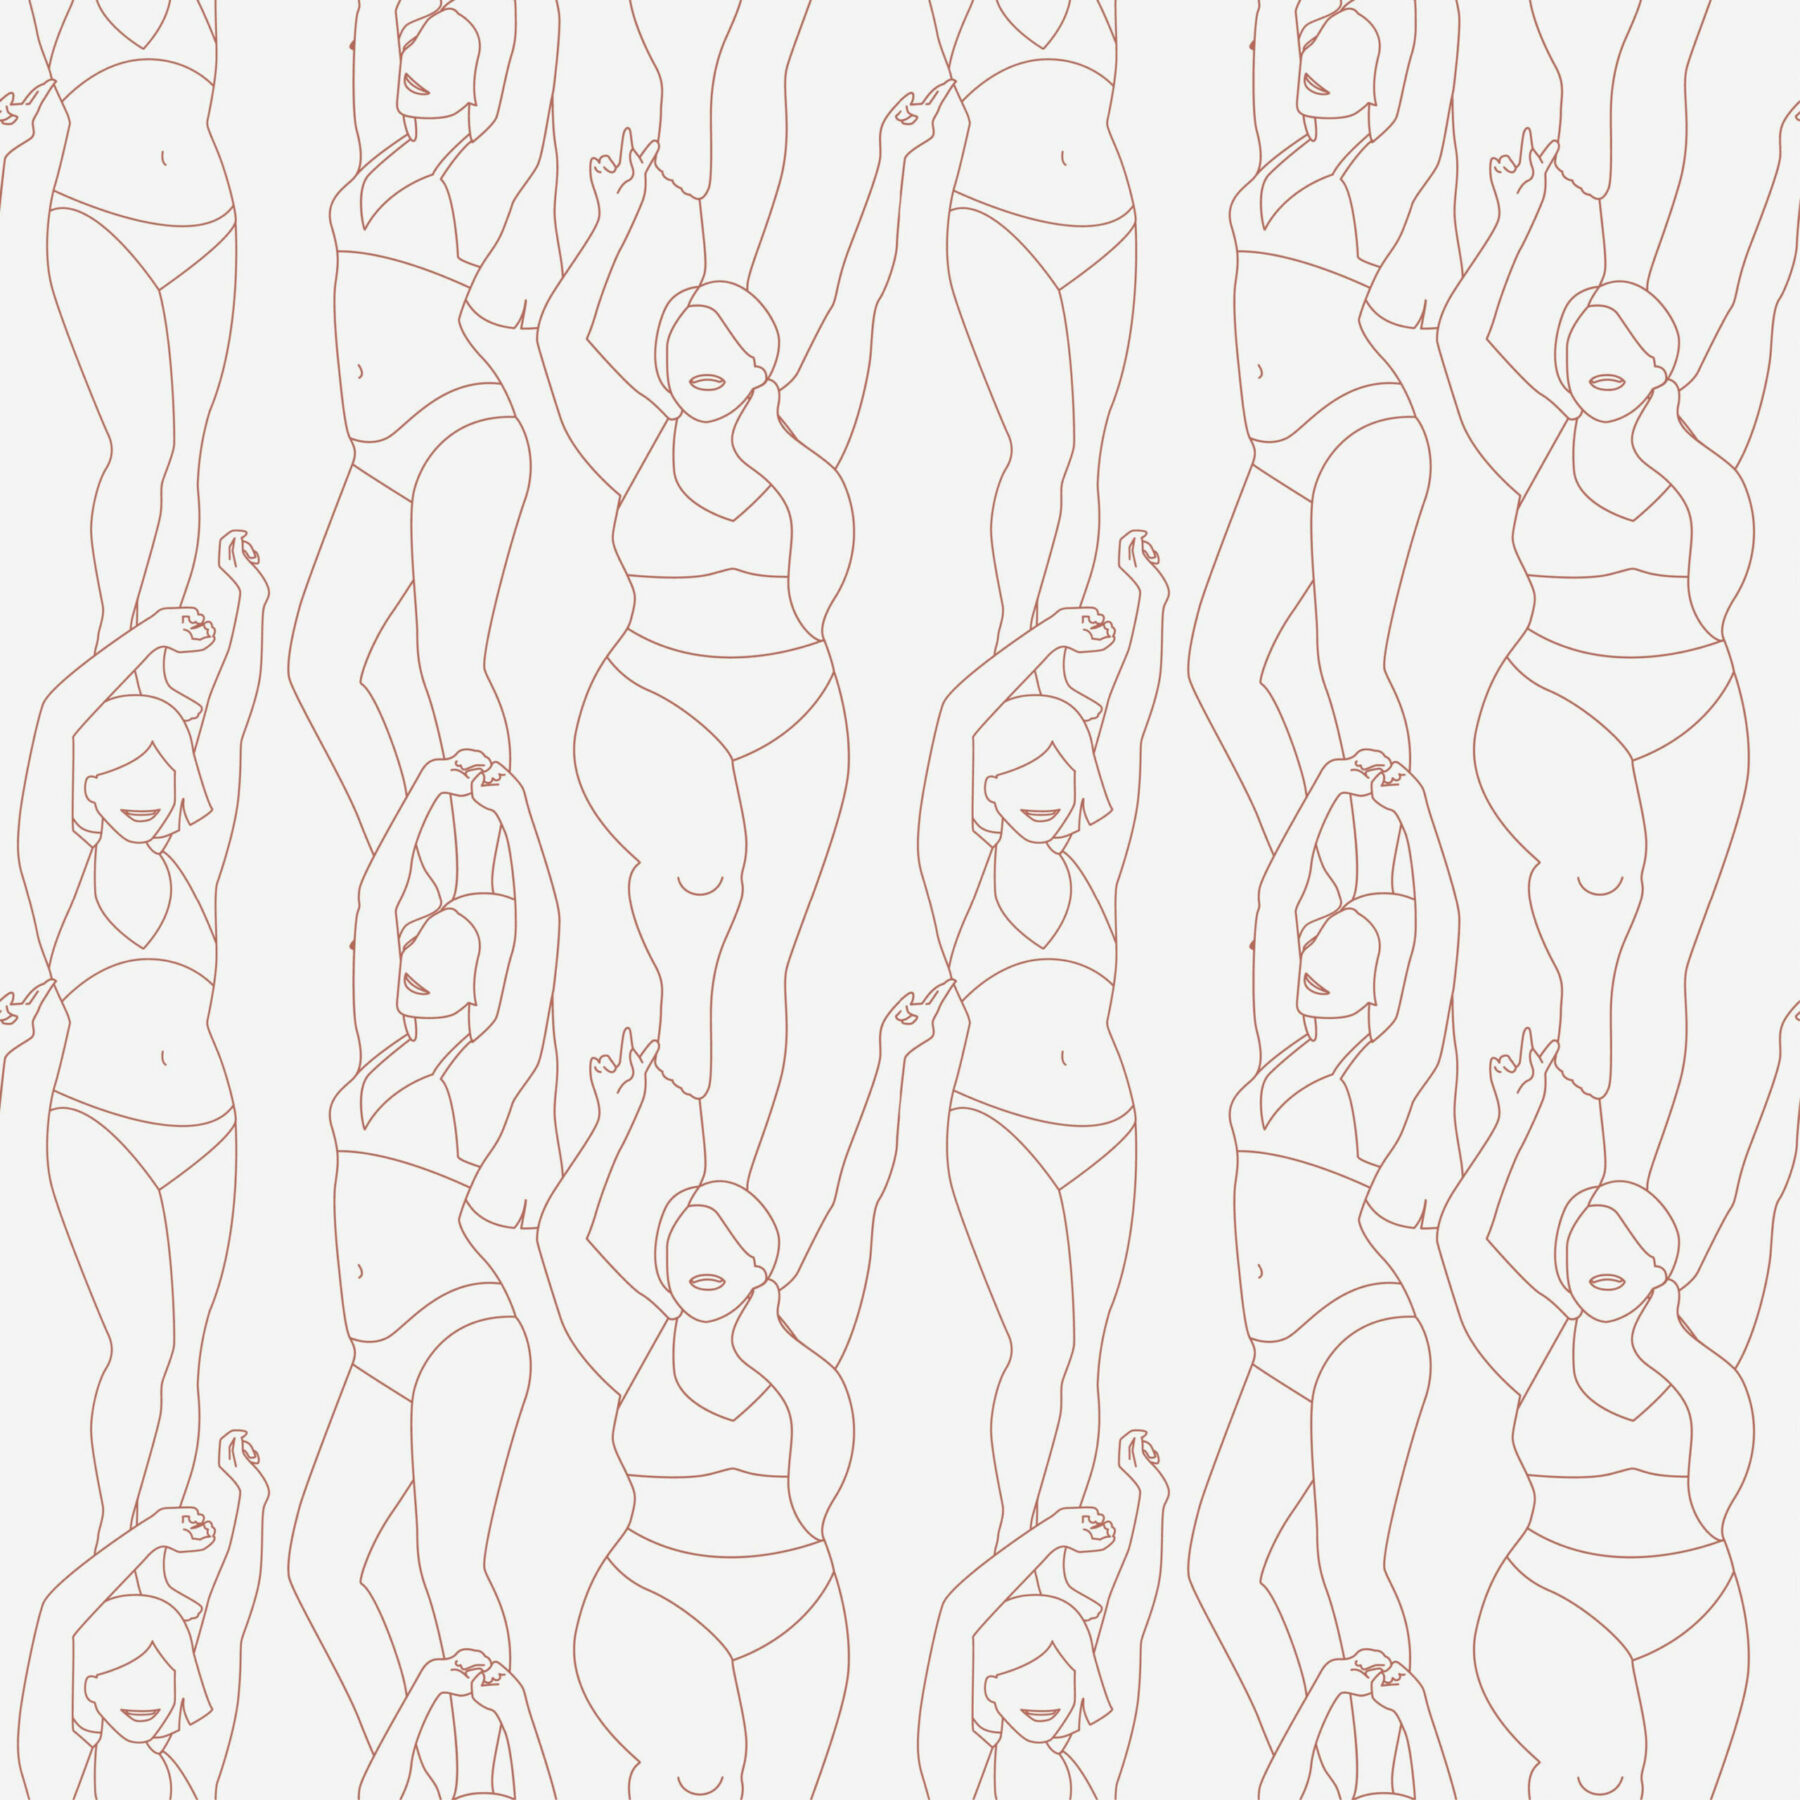 Outlines of women's bodies.